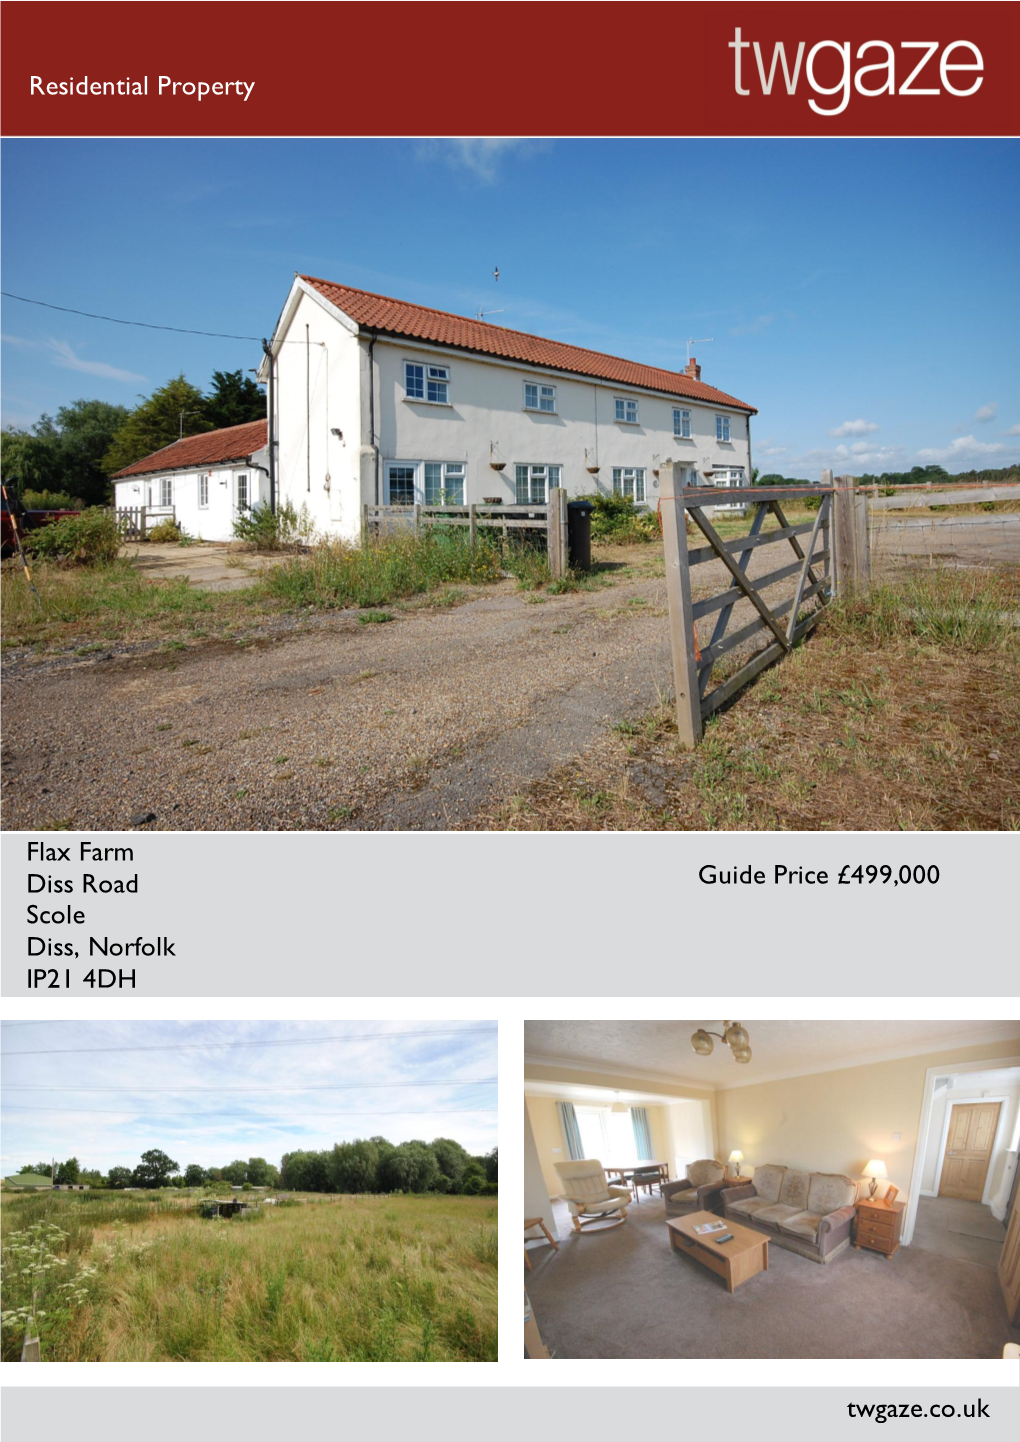 Residential Property Flax Farm Diss Road Scole Diss, Norfolk IP21 4DH Guide Price £499,000 Twgaze.Co.Uk